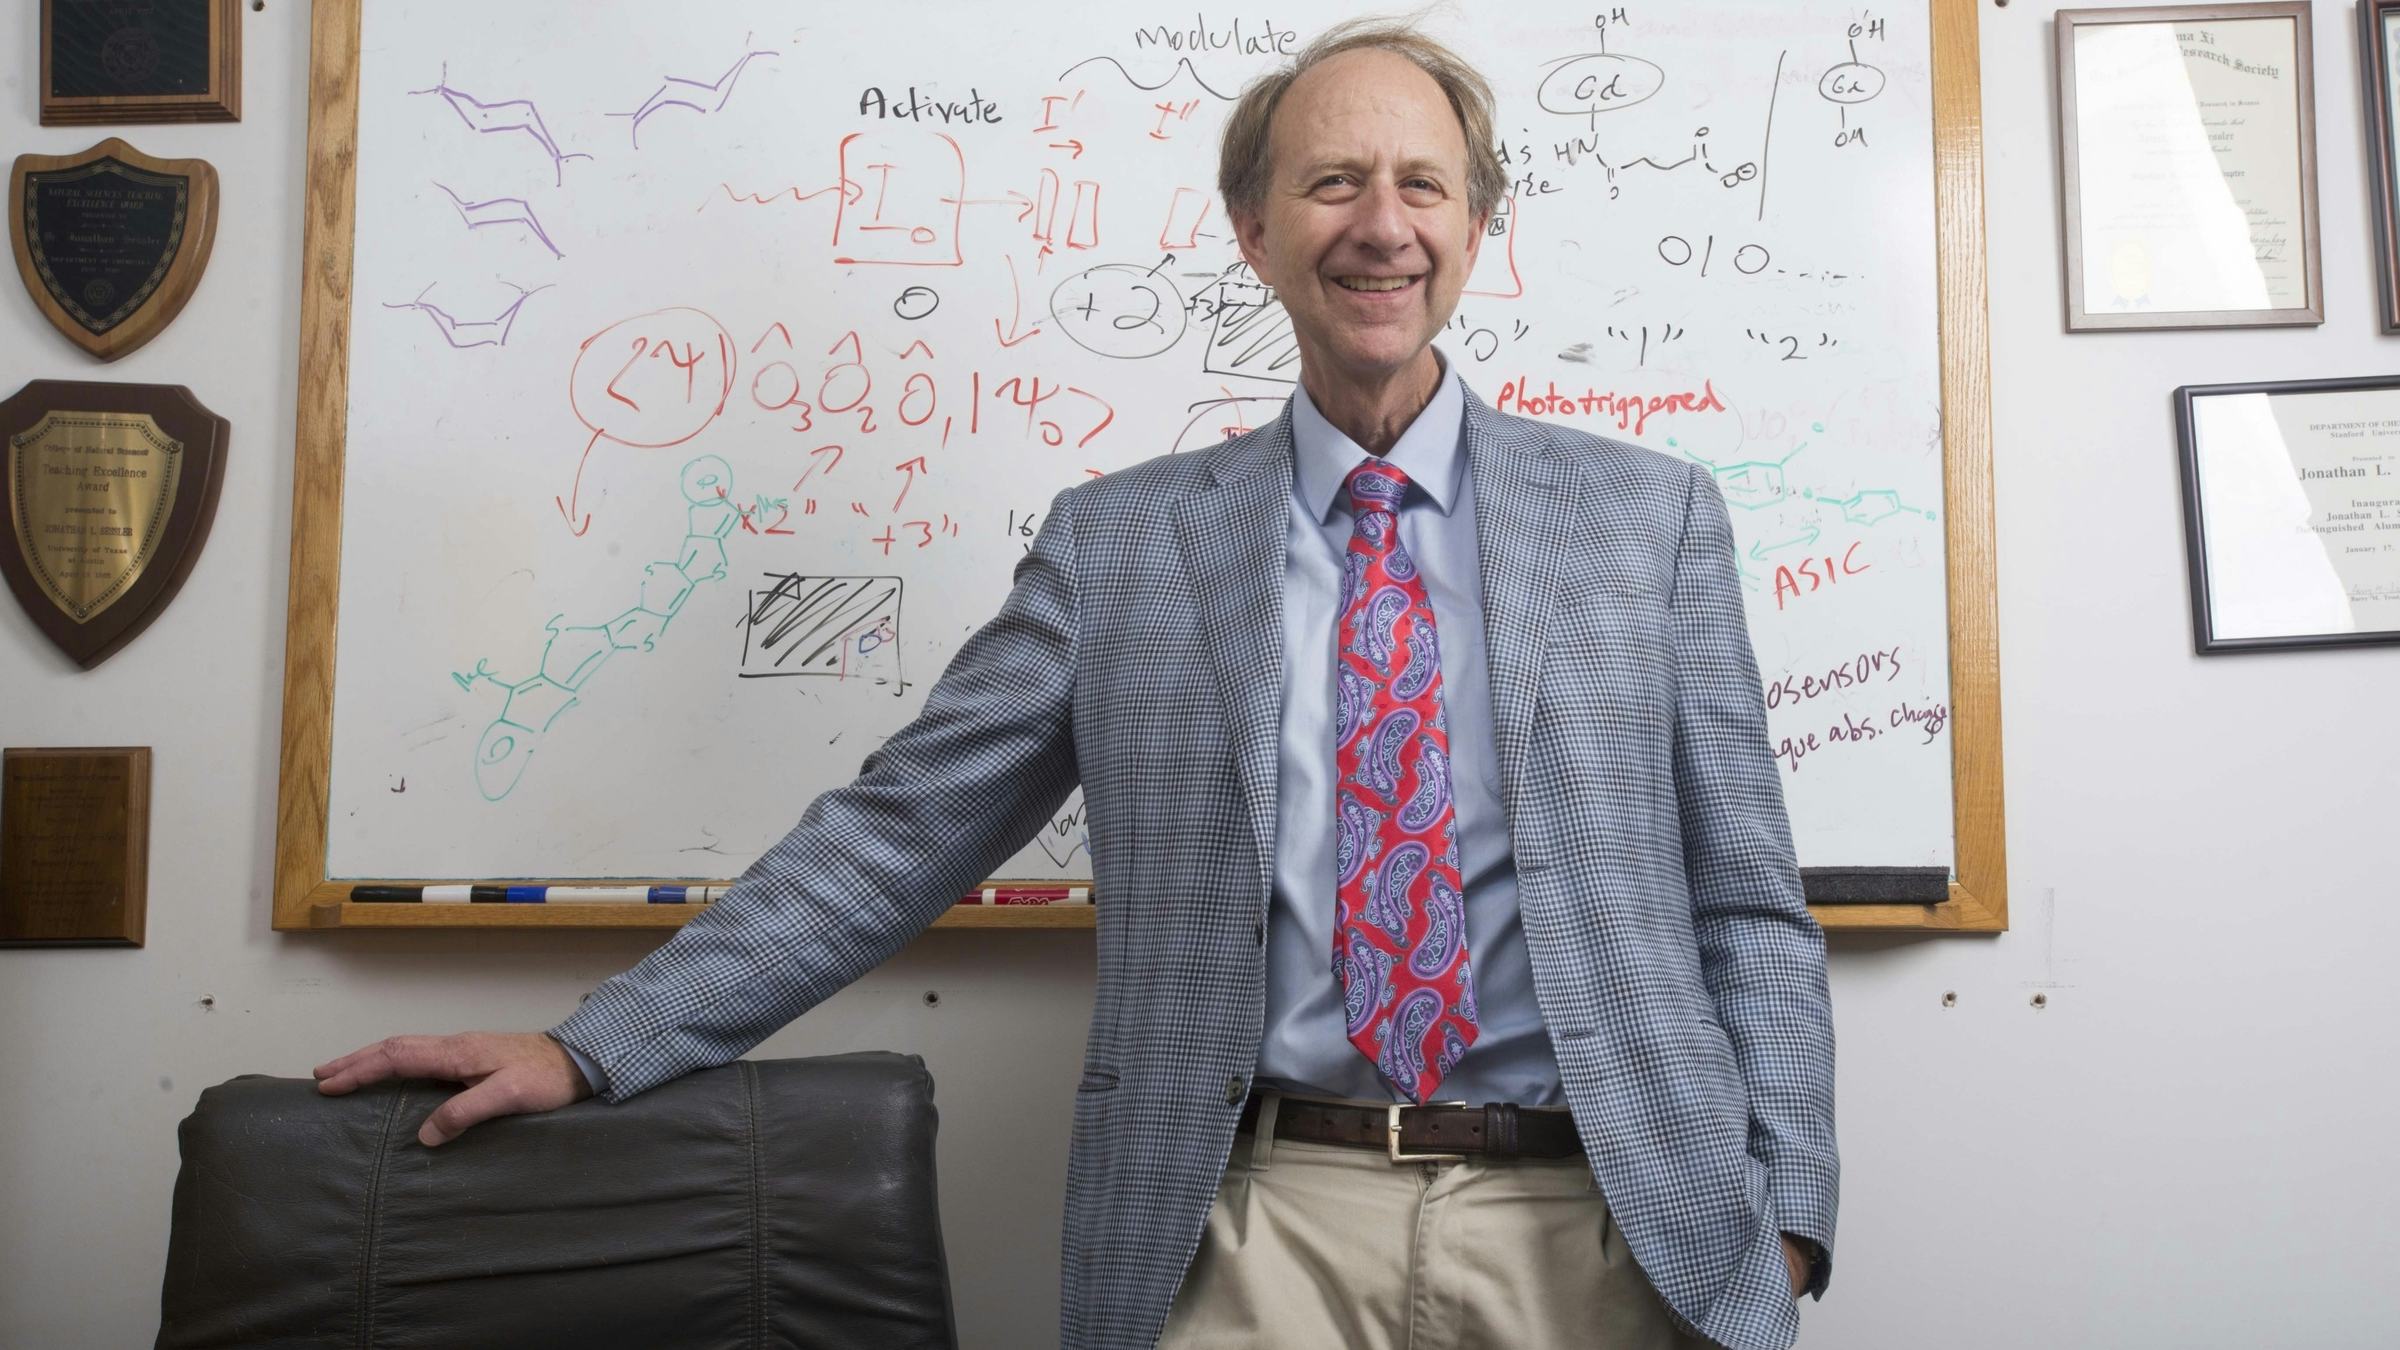 Jonathan Sessler, in suit and tie, smiles and stands before white board with notes